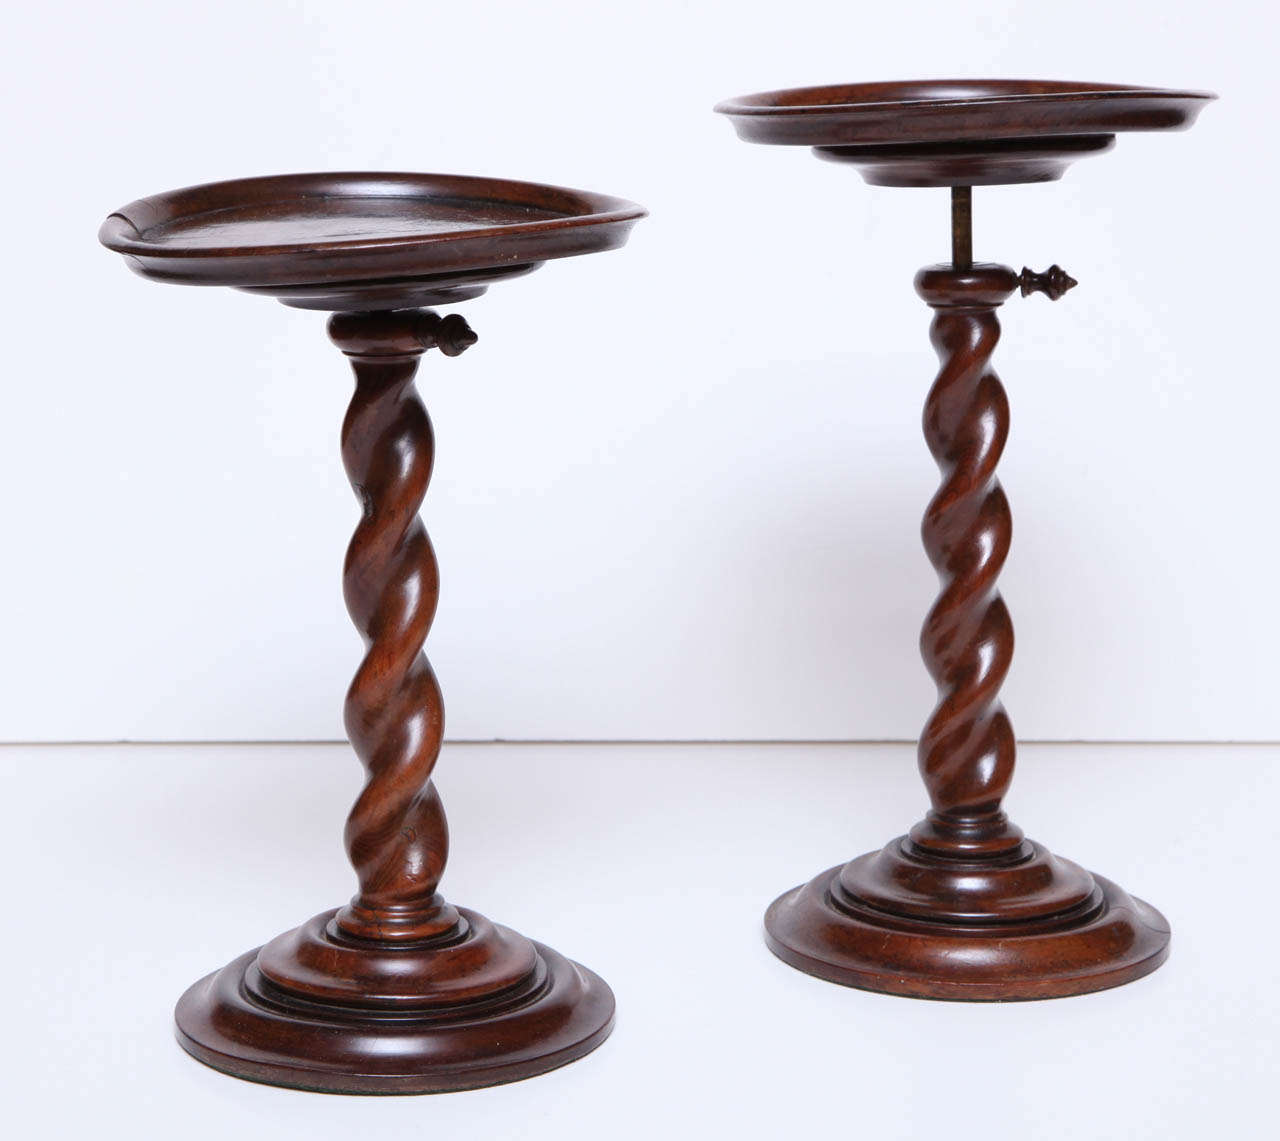 A rare pair of English William and Mary burr yew wood barley-twist adjustable candlestands.